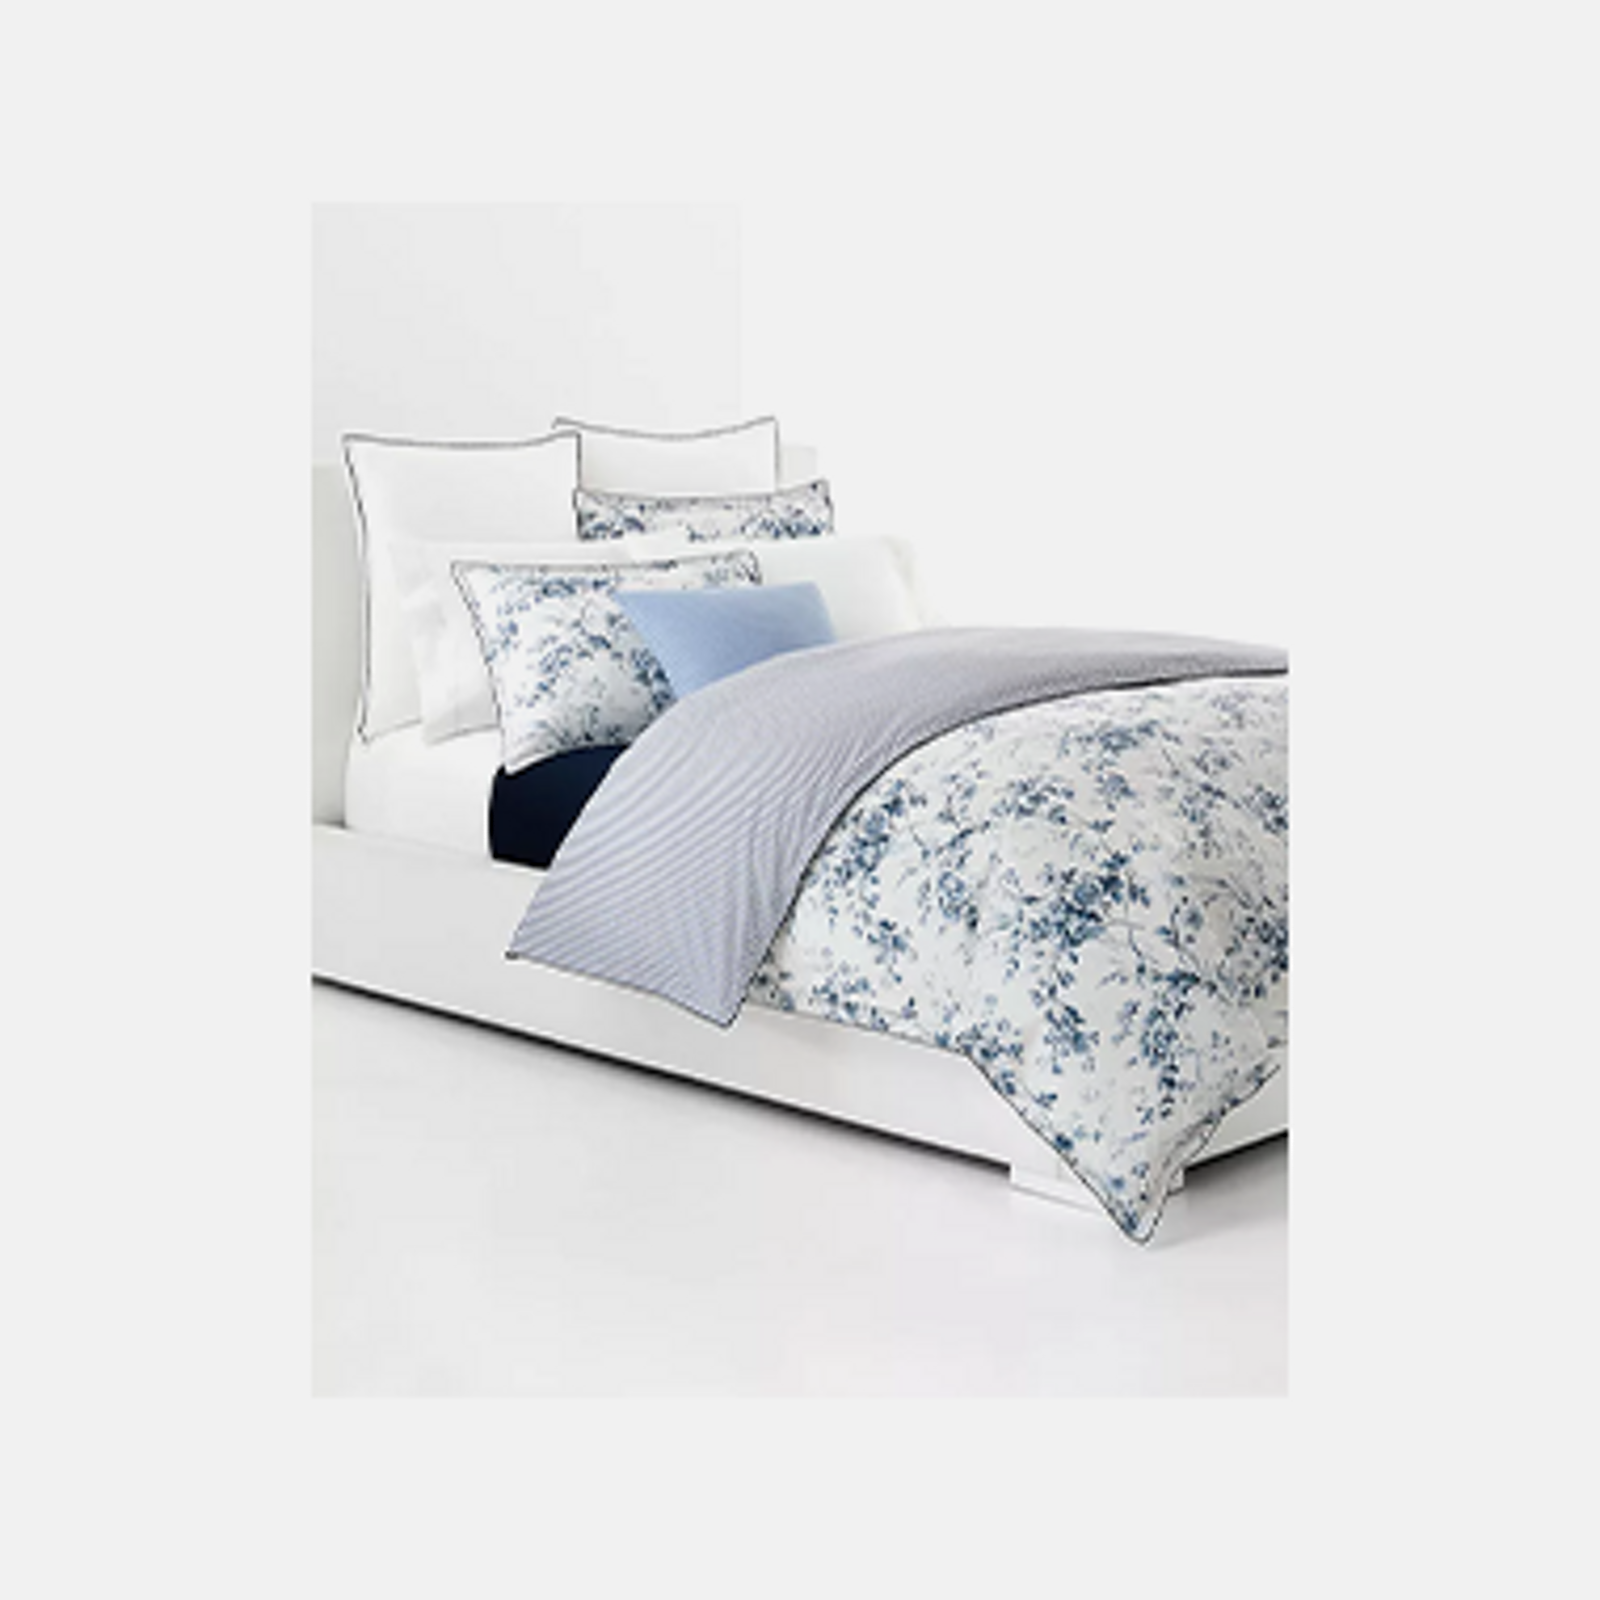 Ralph Lauren Home Elyse Bedding Collection & Matching Items